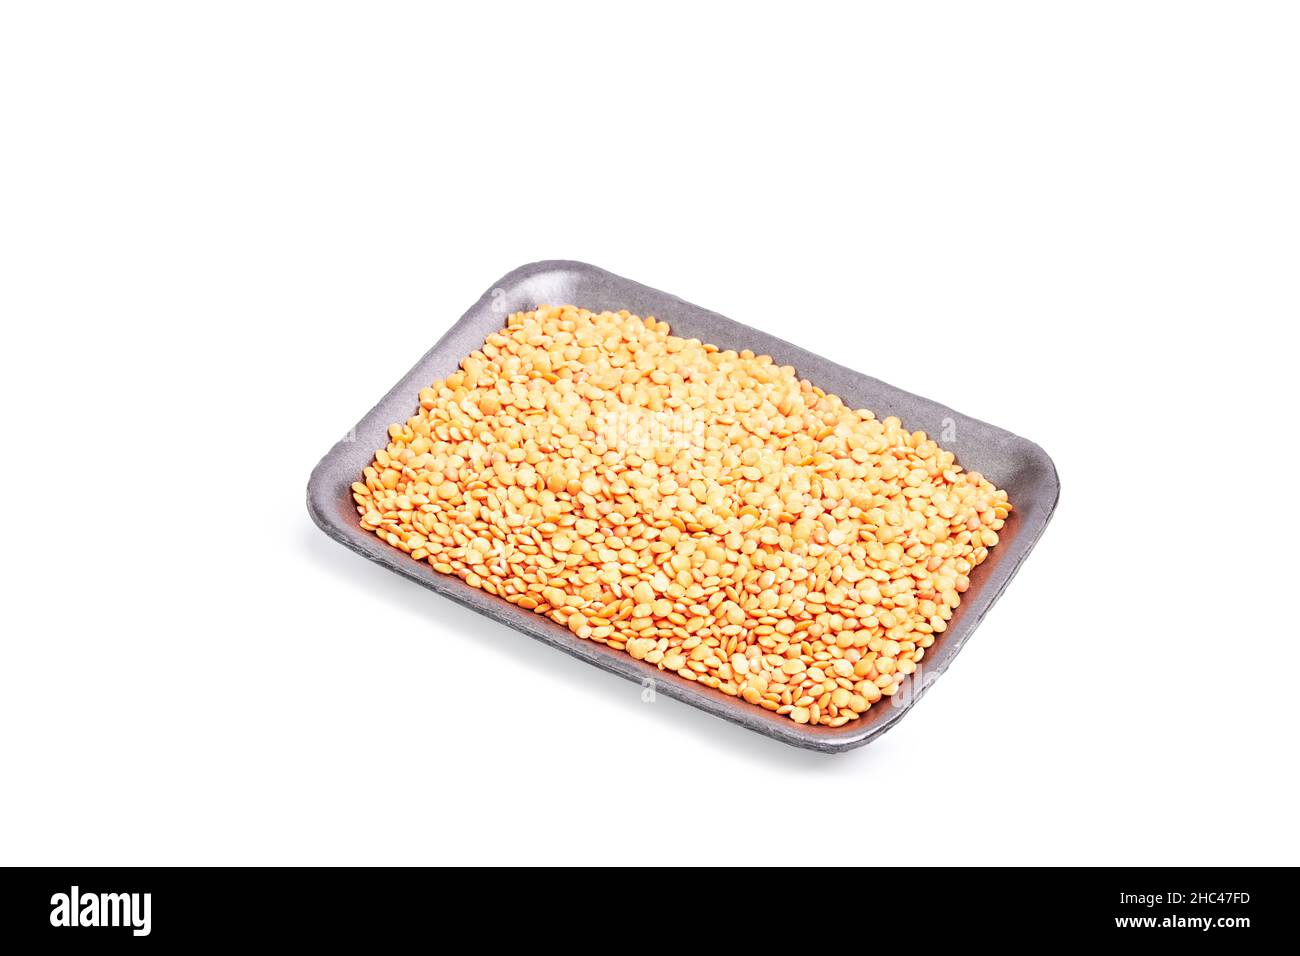 Black tray with raw orange lentils on a white background. Healthy food concept Stock Photo